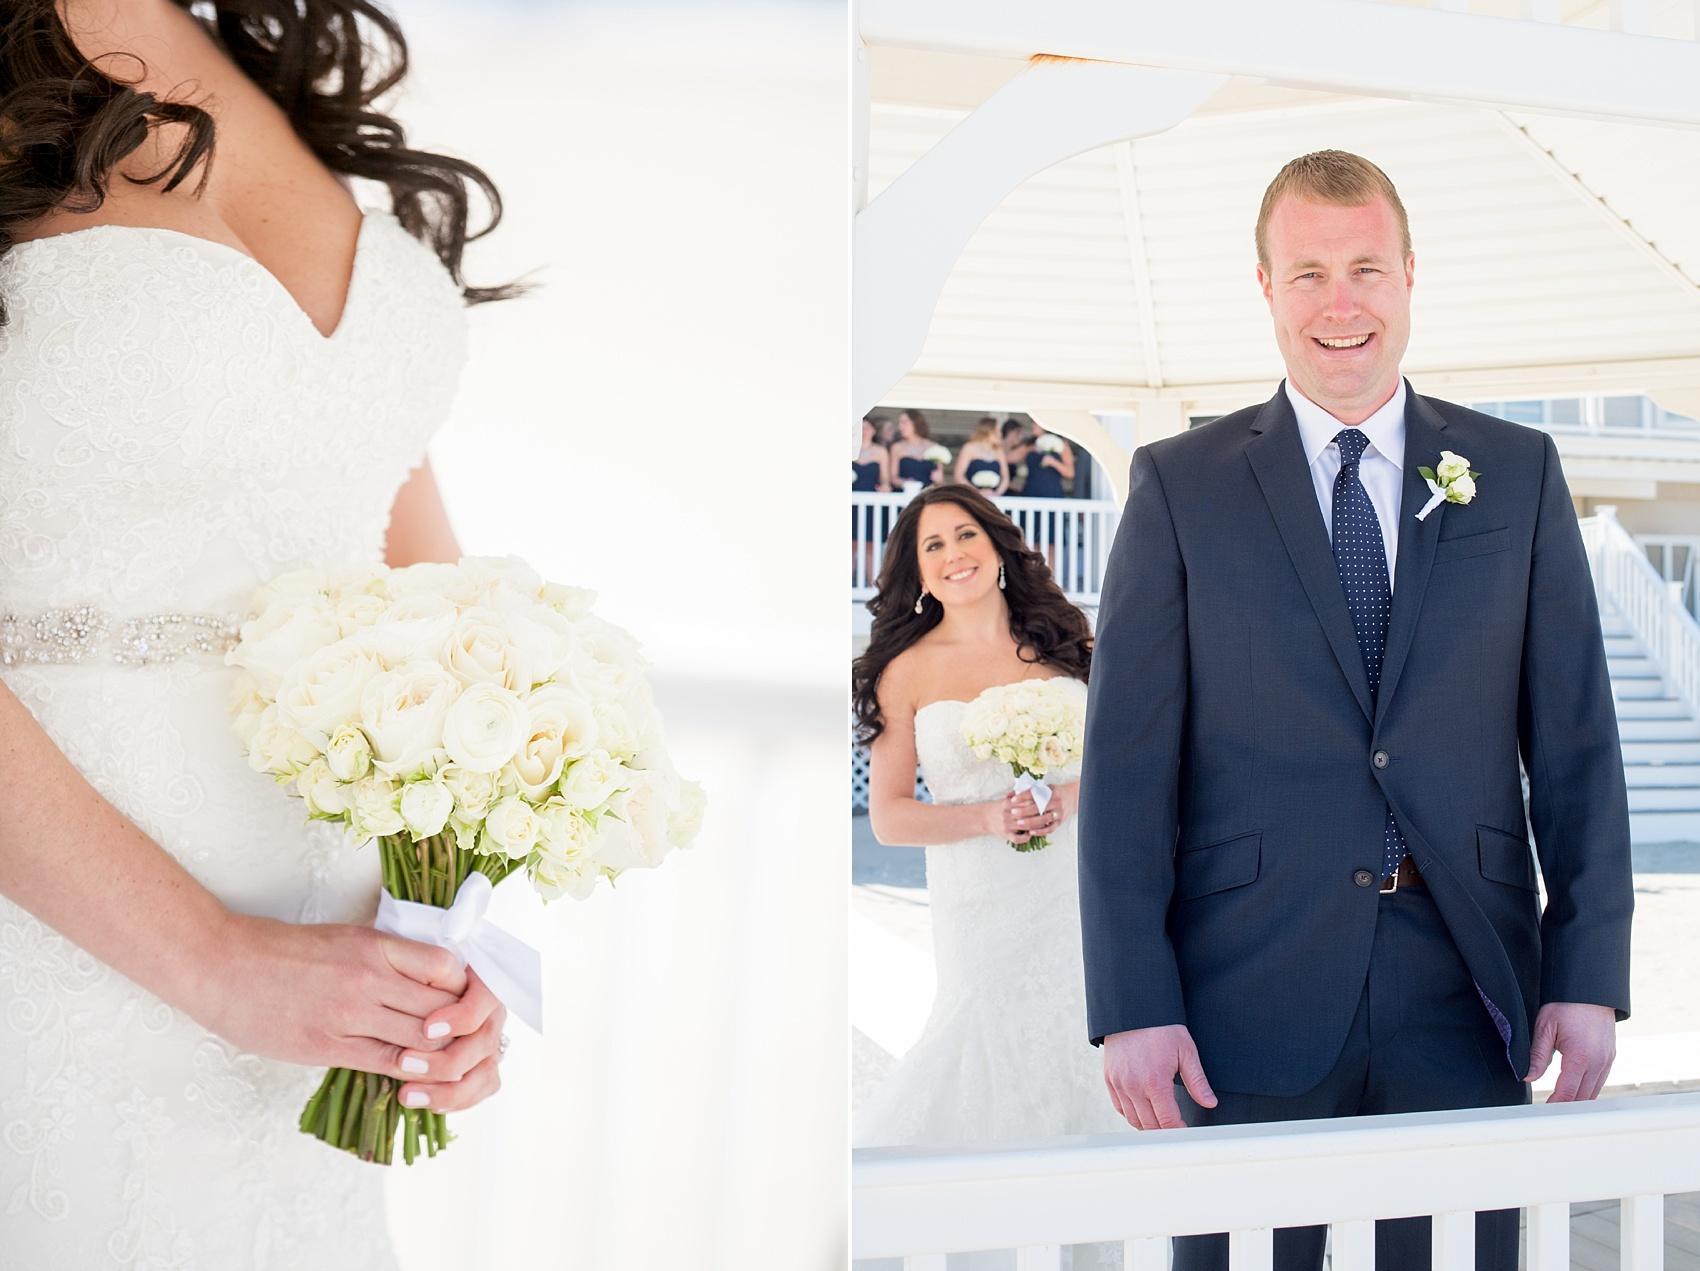 Photo by Mikkel Paige photography. First look for a wedding at Windows on the Water in Sea Bright, NJ on the beach. Bridal bouquet of white garden roses.